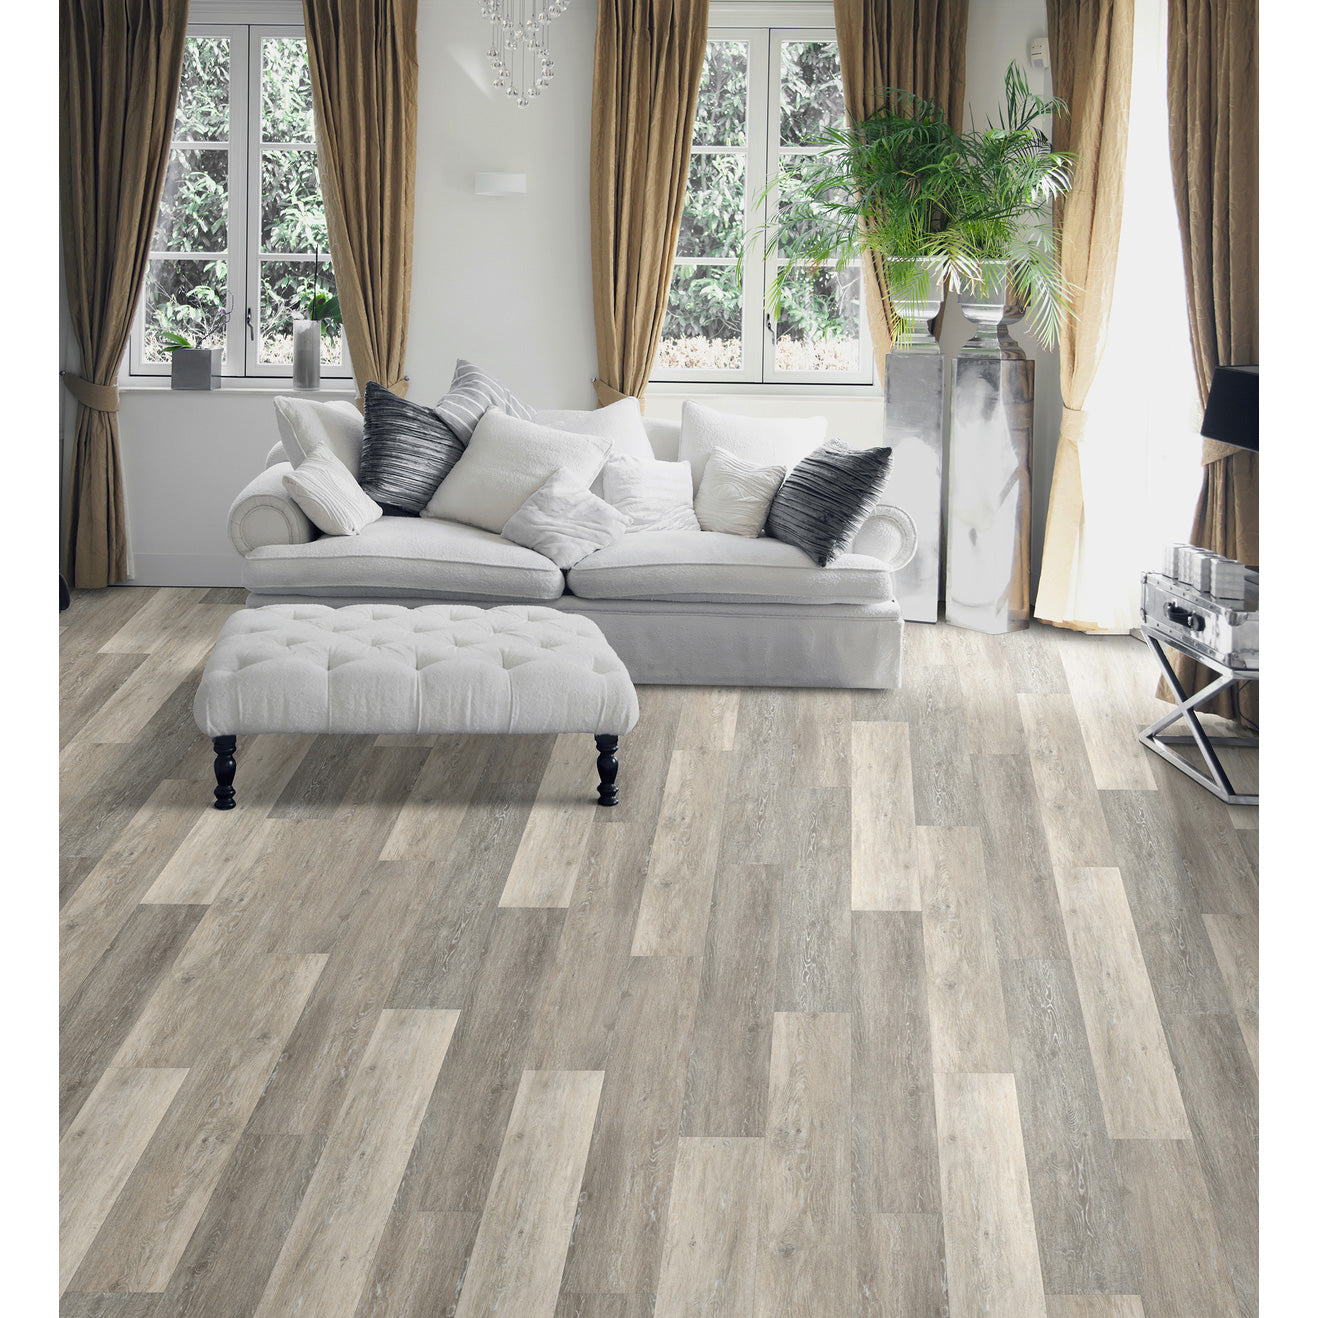 Engineered Floors - Triumph Collection - Renewal - 7 in. x 48 in. - HarmonyEngineered Floors - Triumph Collection - Renewal - 7 in. x 48 in. - Harmony